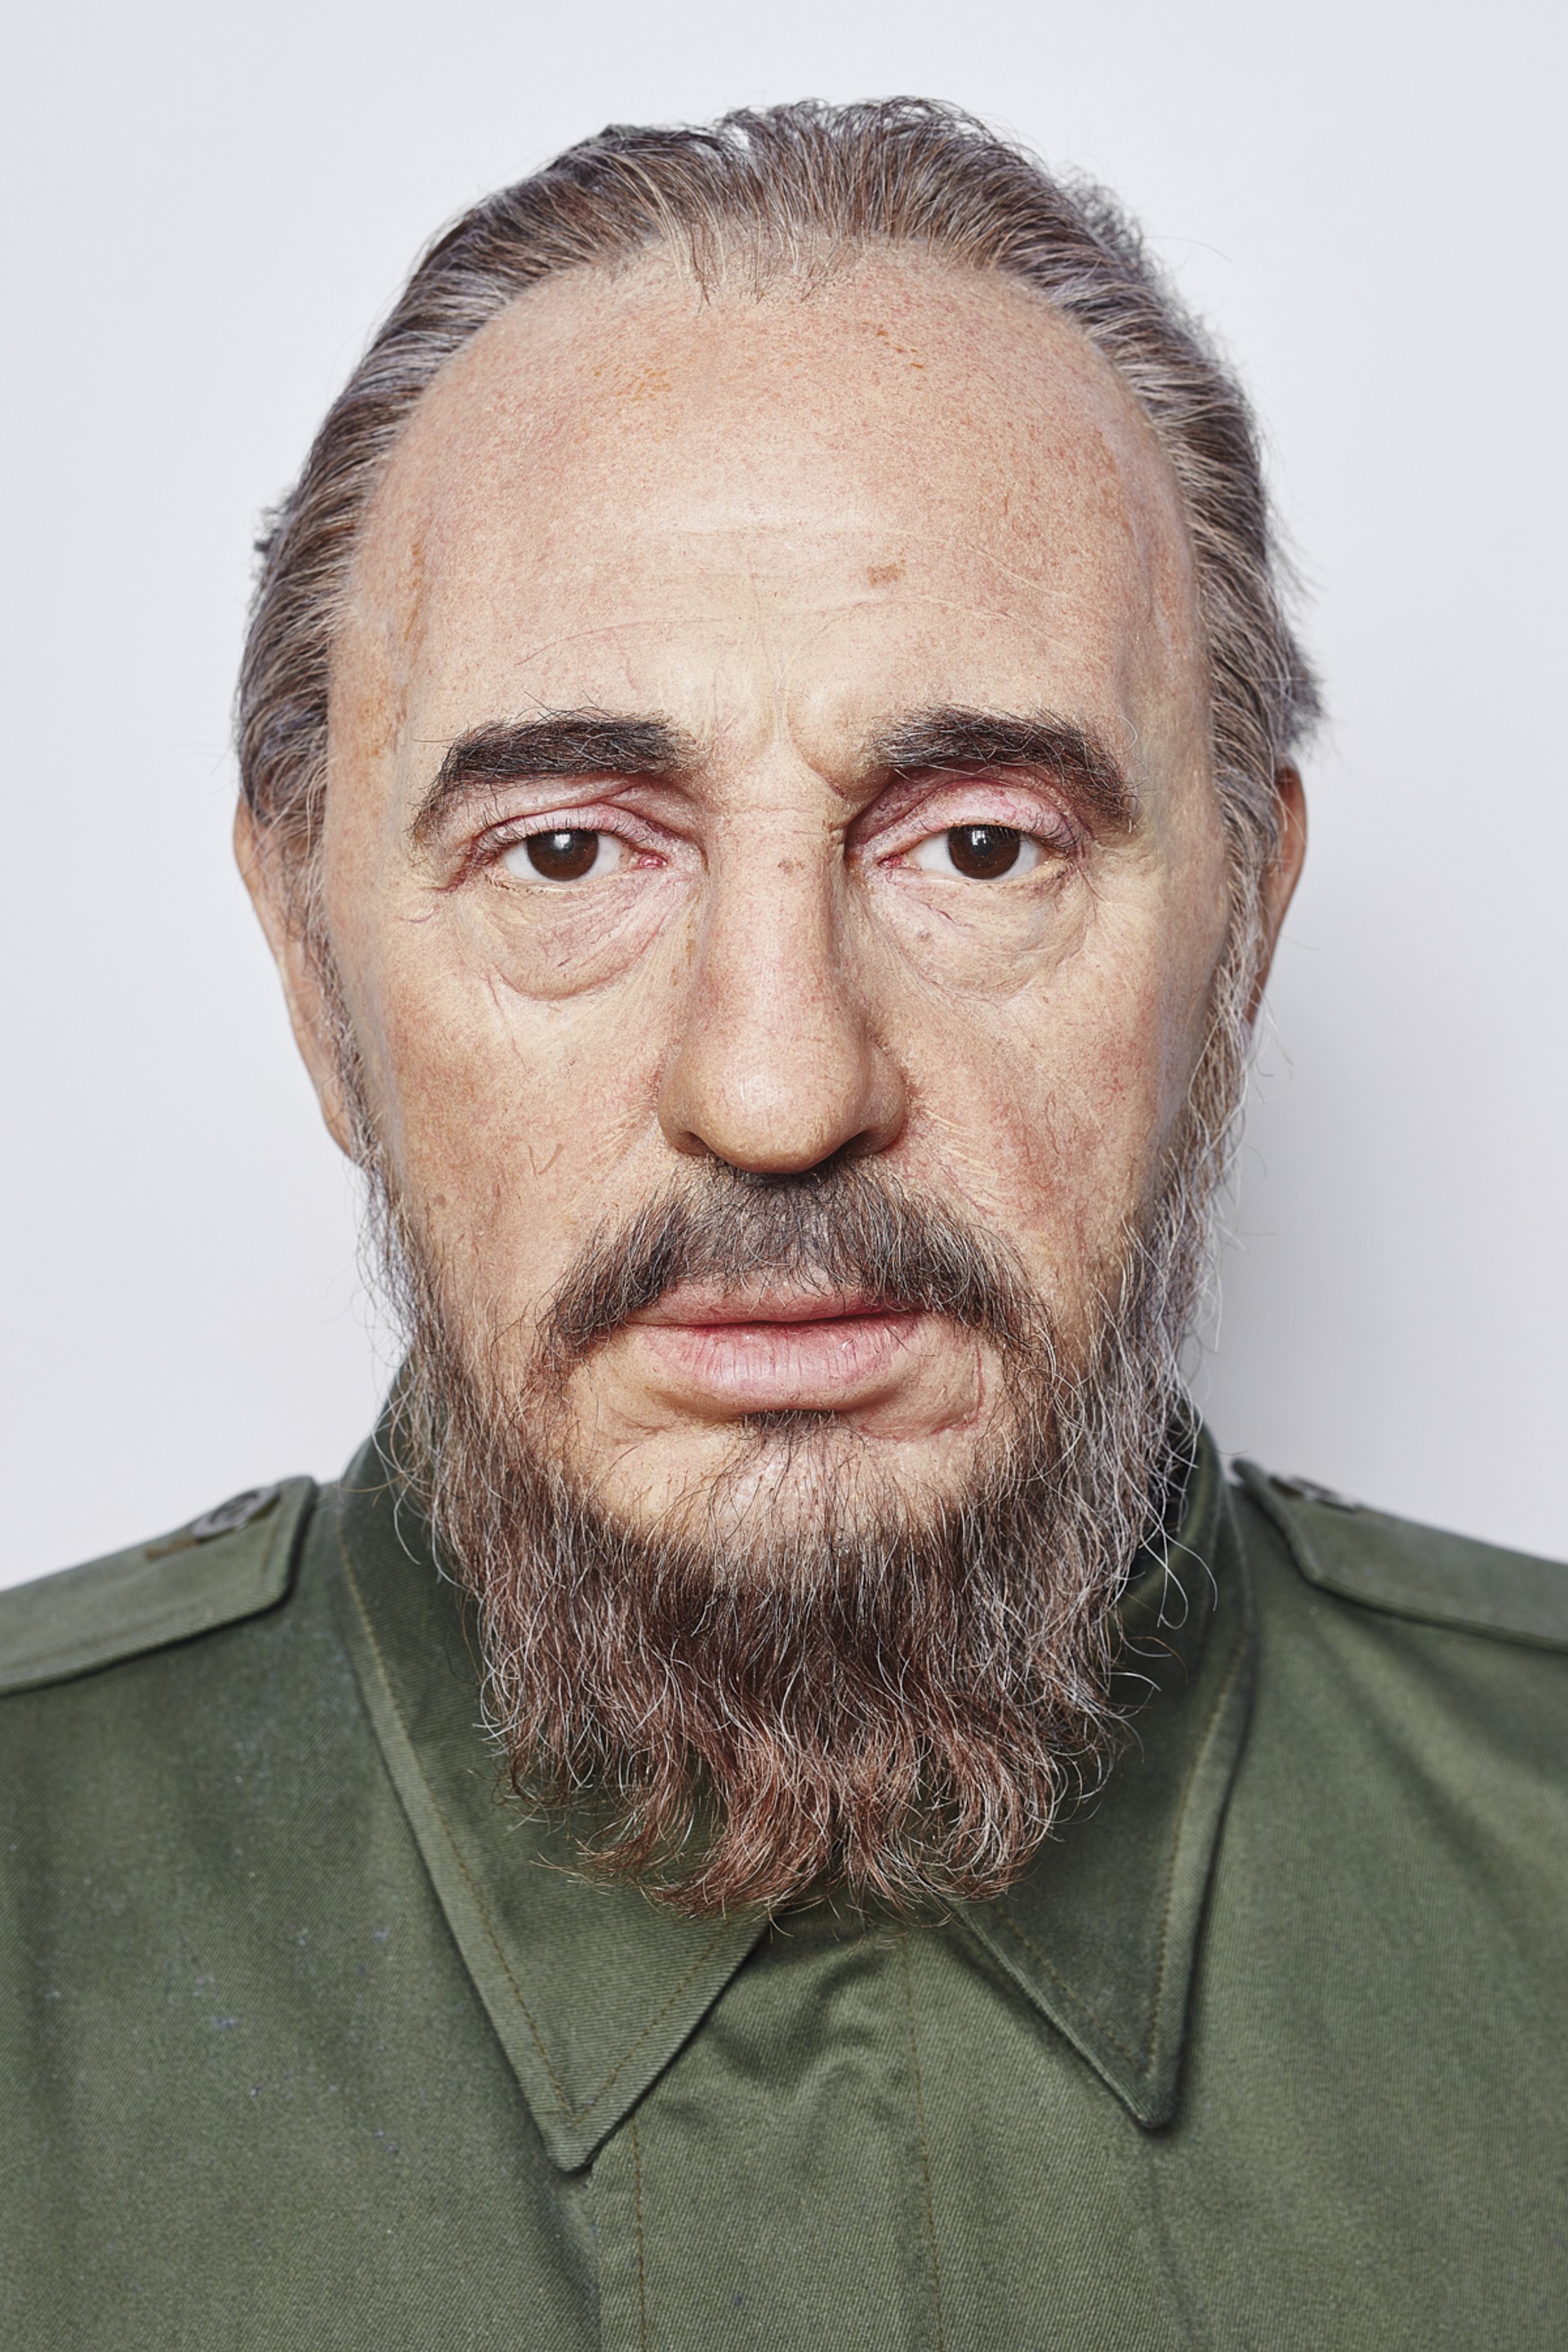 This is not Fidel Castro by Peter Andrew Lusztyk | Uncanny Valley